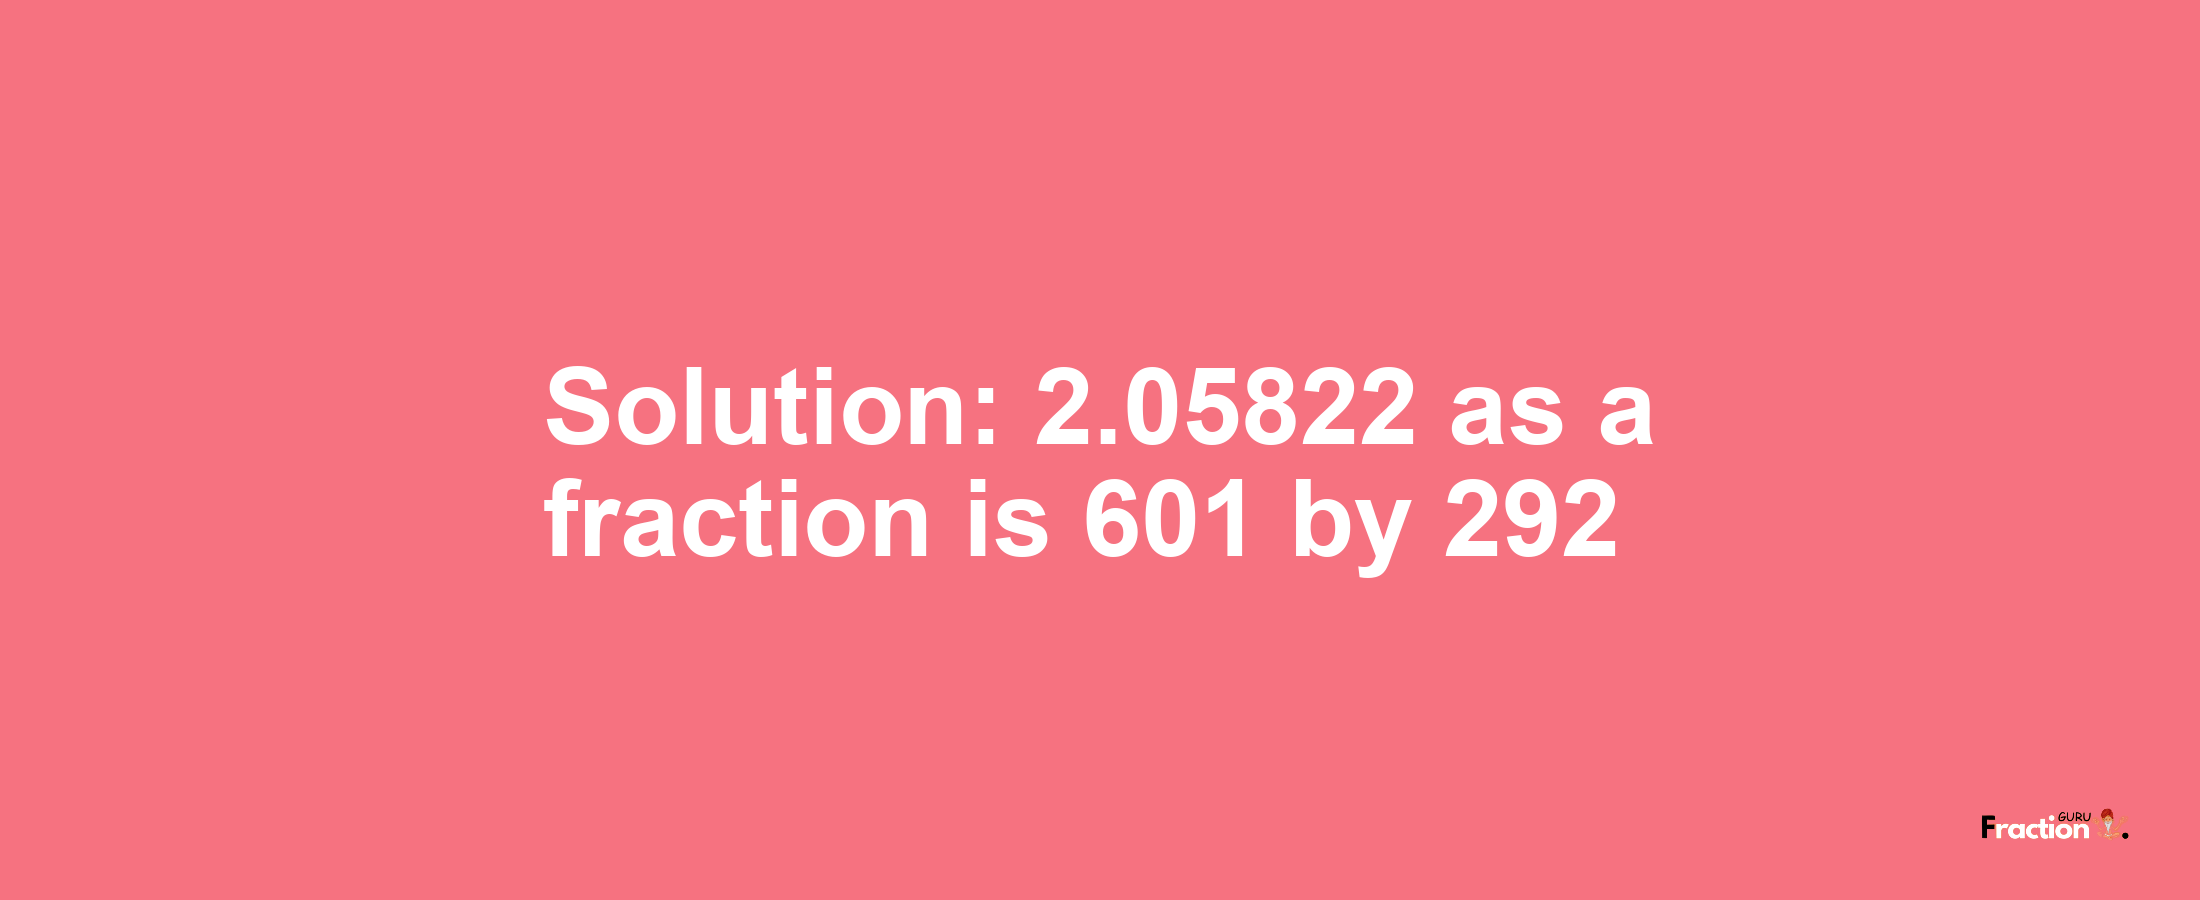 Solution:2.05822 as a fraction is 601/292